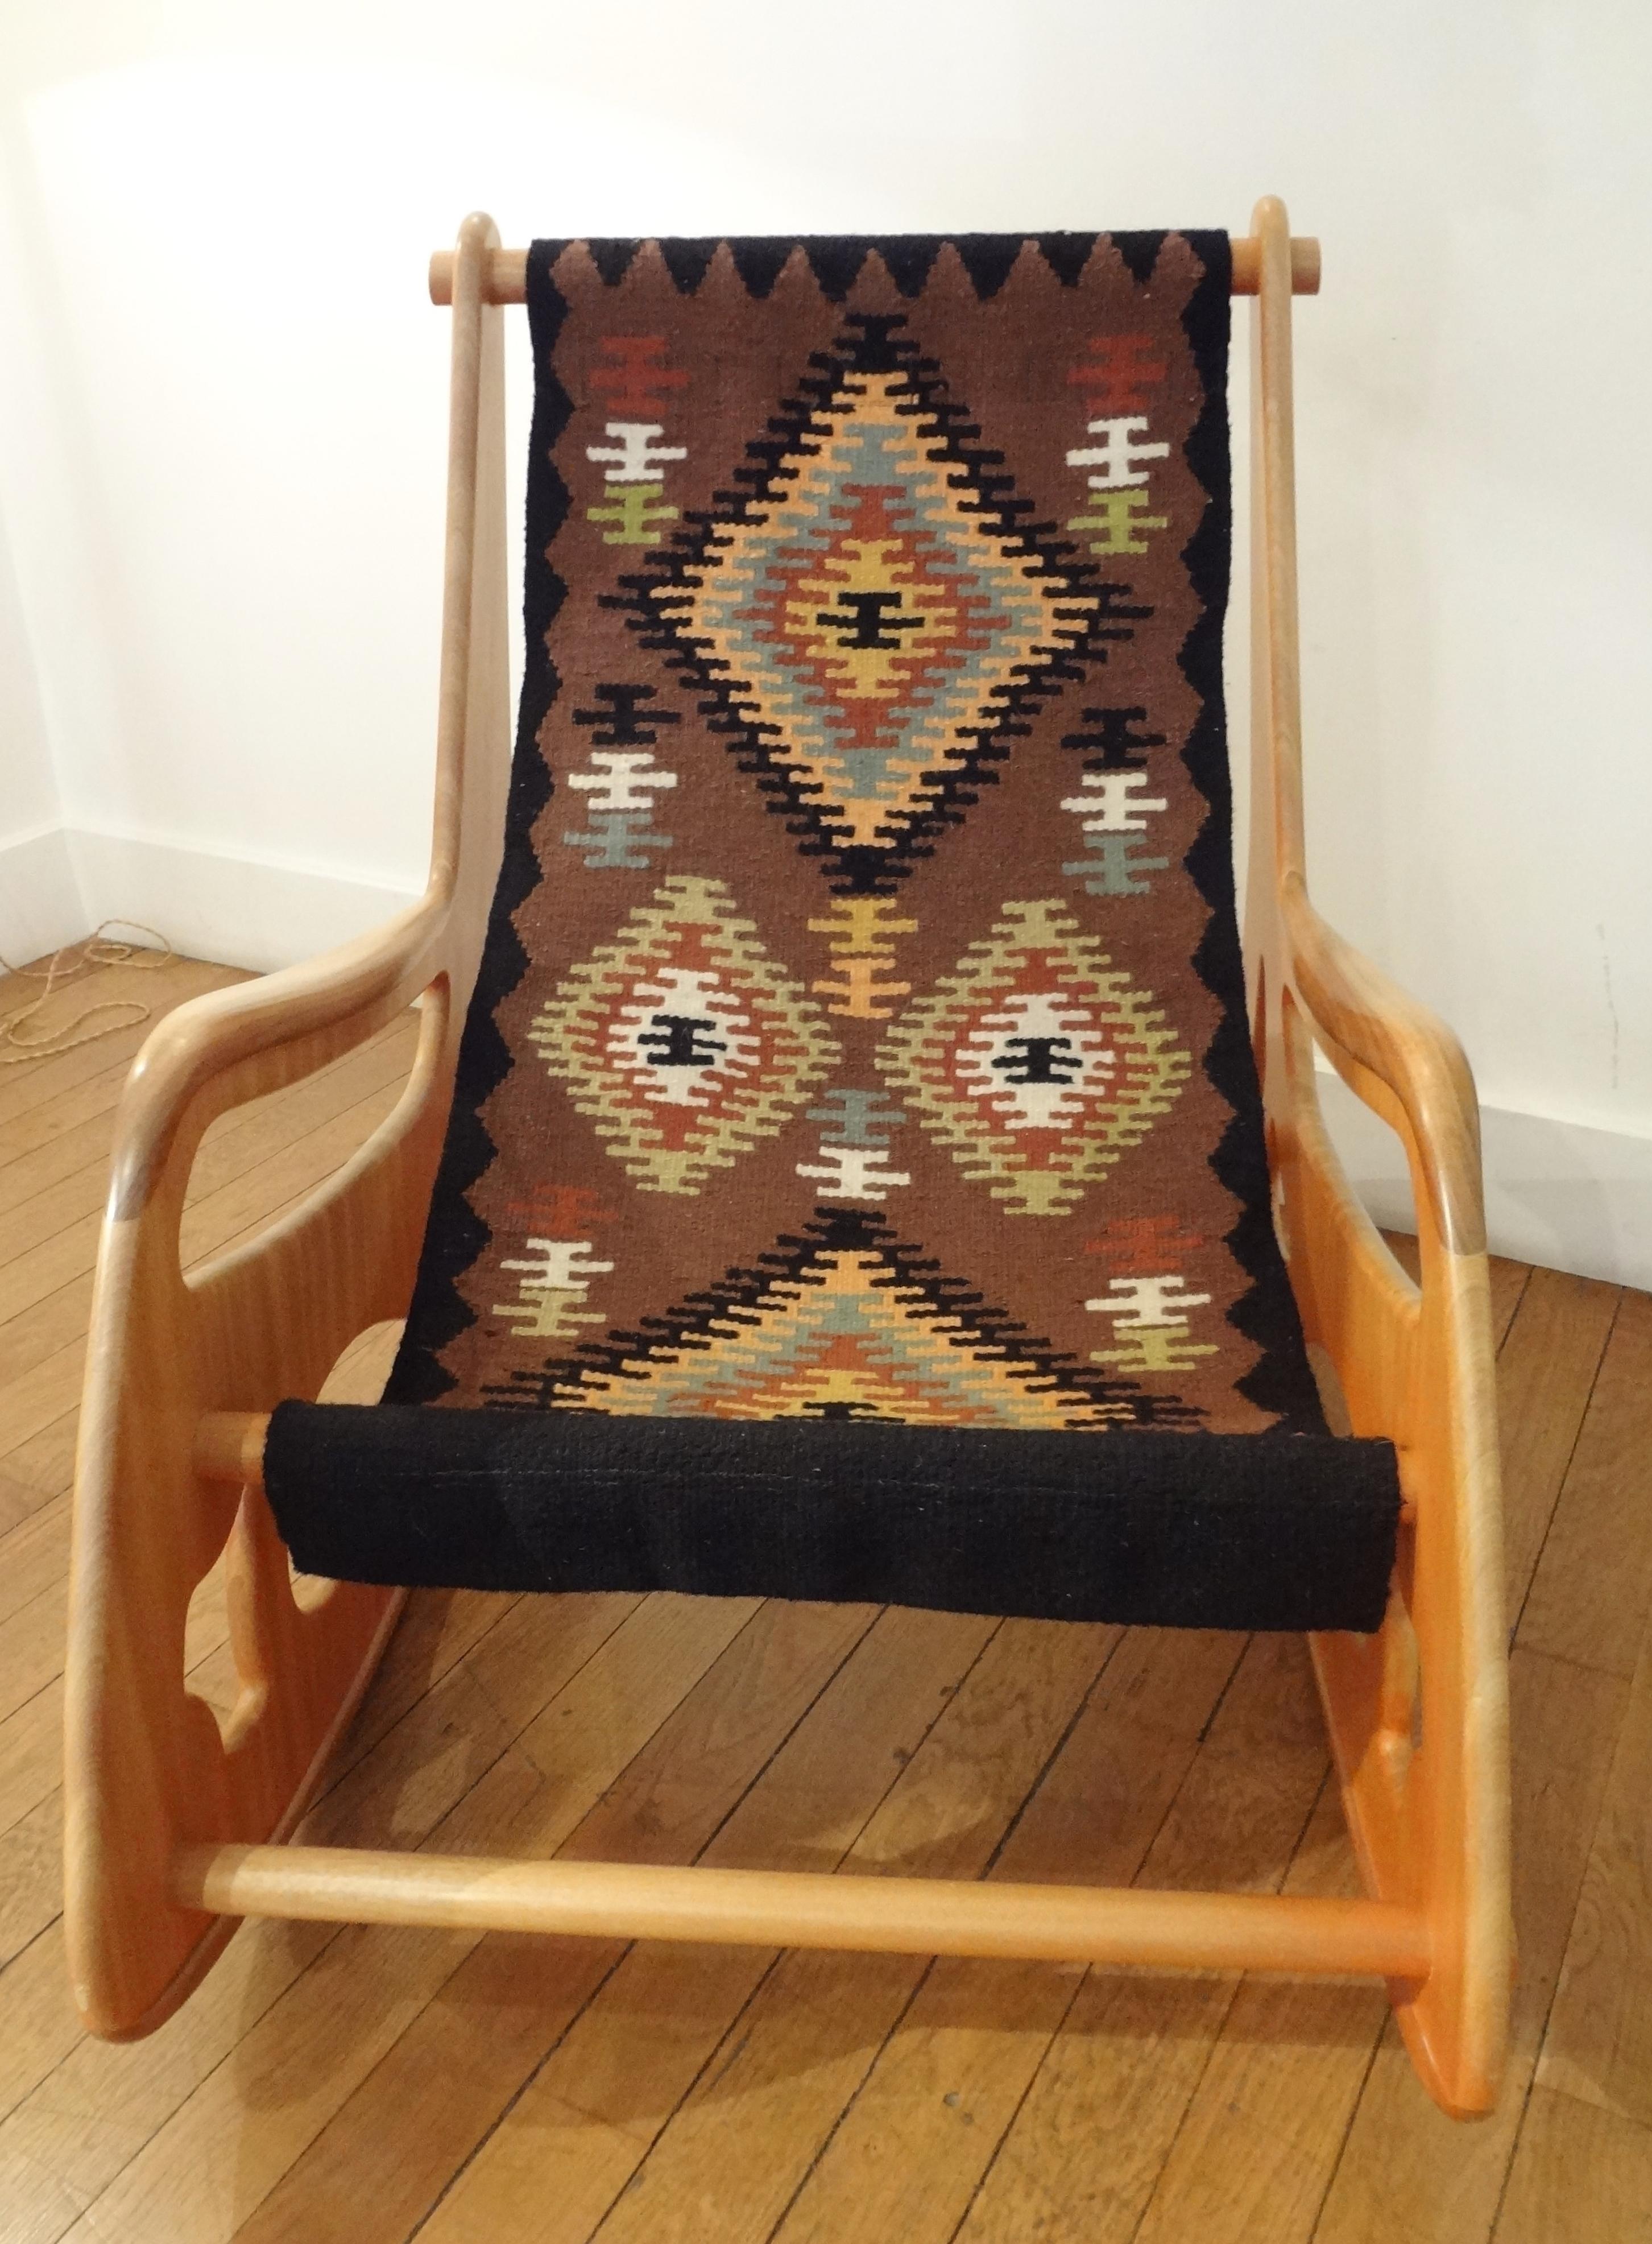 Apostolos Porsanidis, France.
Large wood rocking armchair, 2009
With teck and exotic wood sculpted open sides and Kilim wool tapestry seating.
Measures: Height 35.5 x width 27.5 x depth 42 inches.
With its original small scale model.
Apostolos